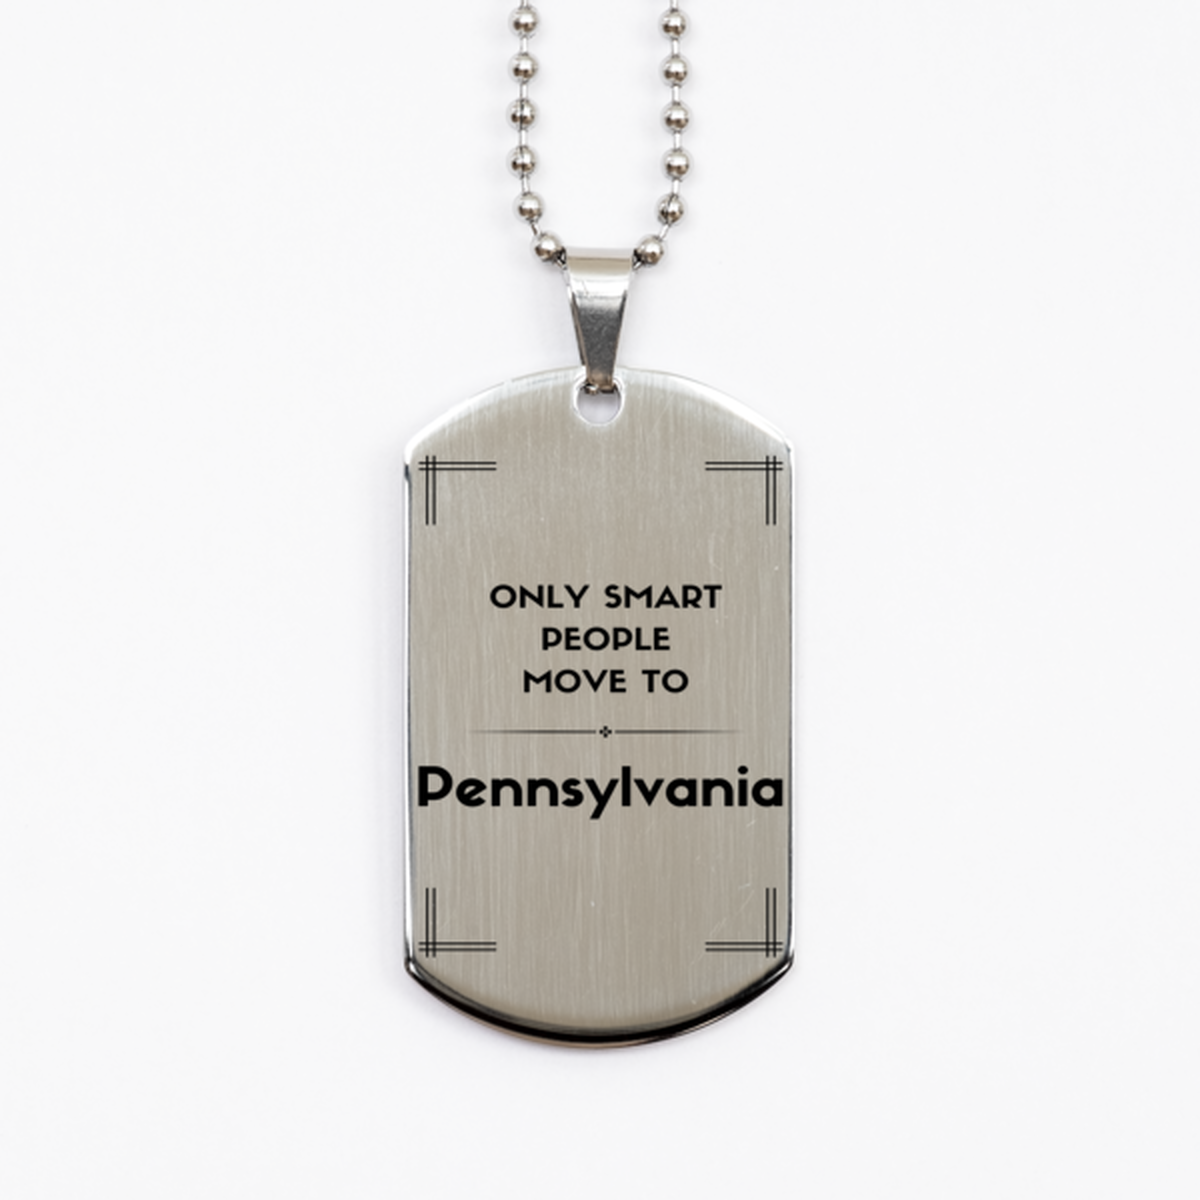 Only smart people move to Pennsylvania Silver Dog Tag, Gag Gifts For Pennsylvania, Move to Pennsylvania Gifts for Friends Coworker Funny Saying Quote